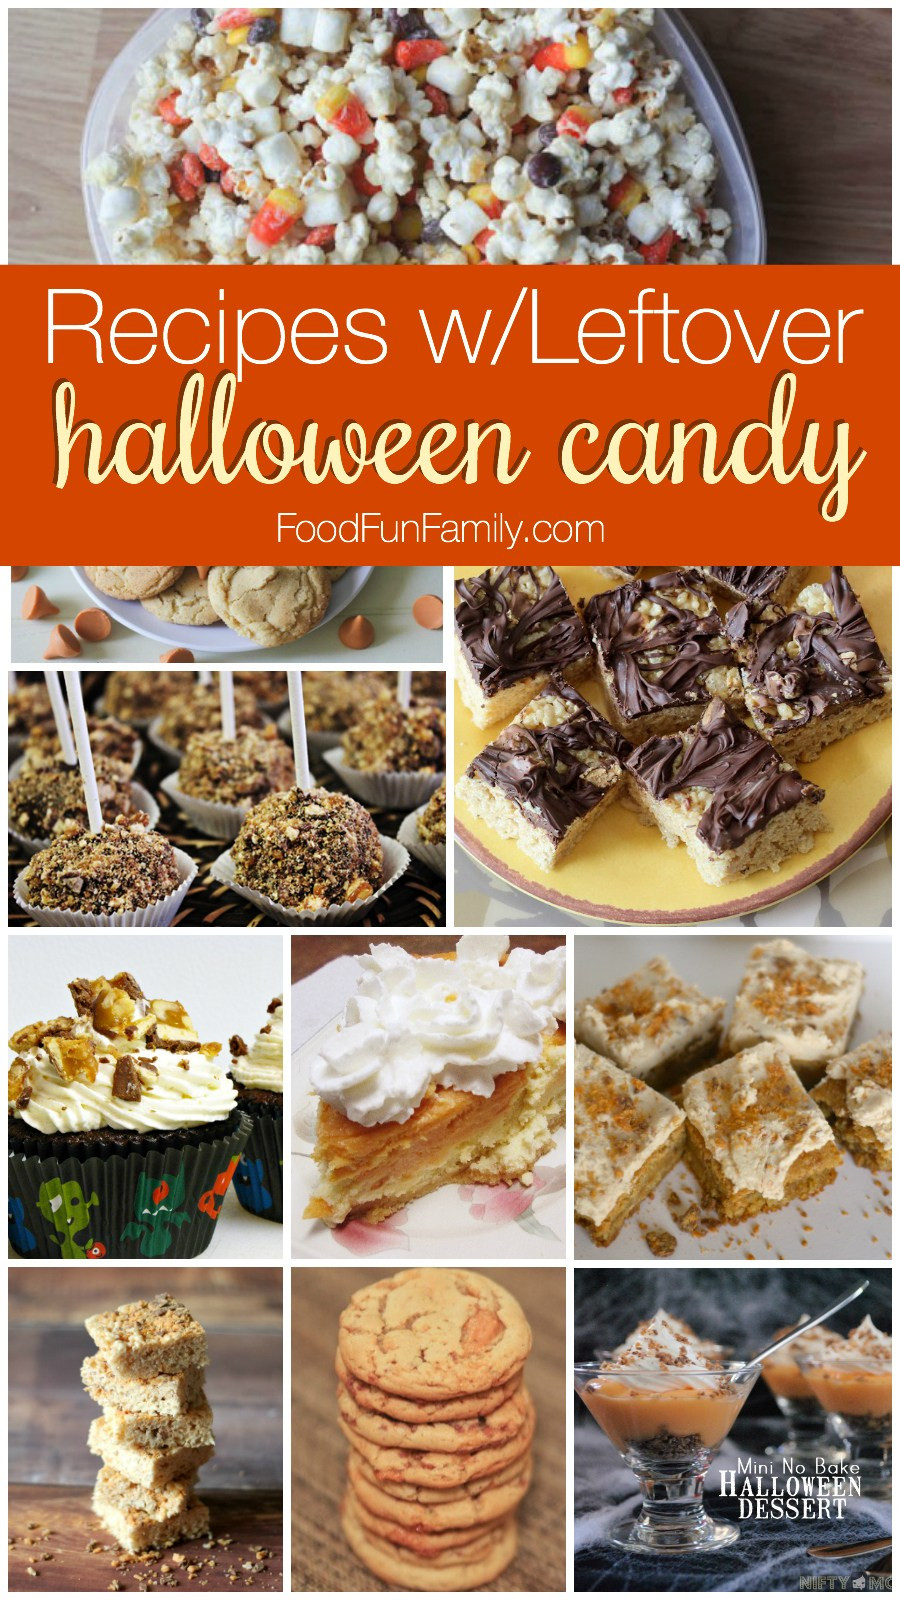 Recipes For Leftover Halloween Candy
 Leftover Halloween Candy Recipes and Crafts